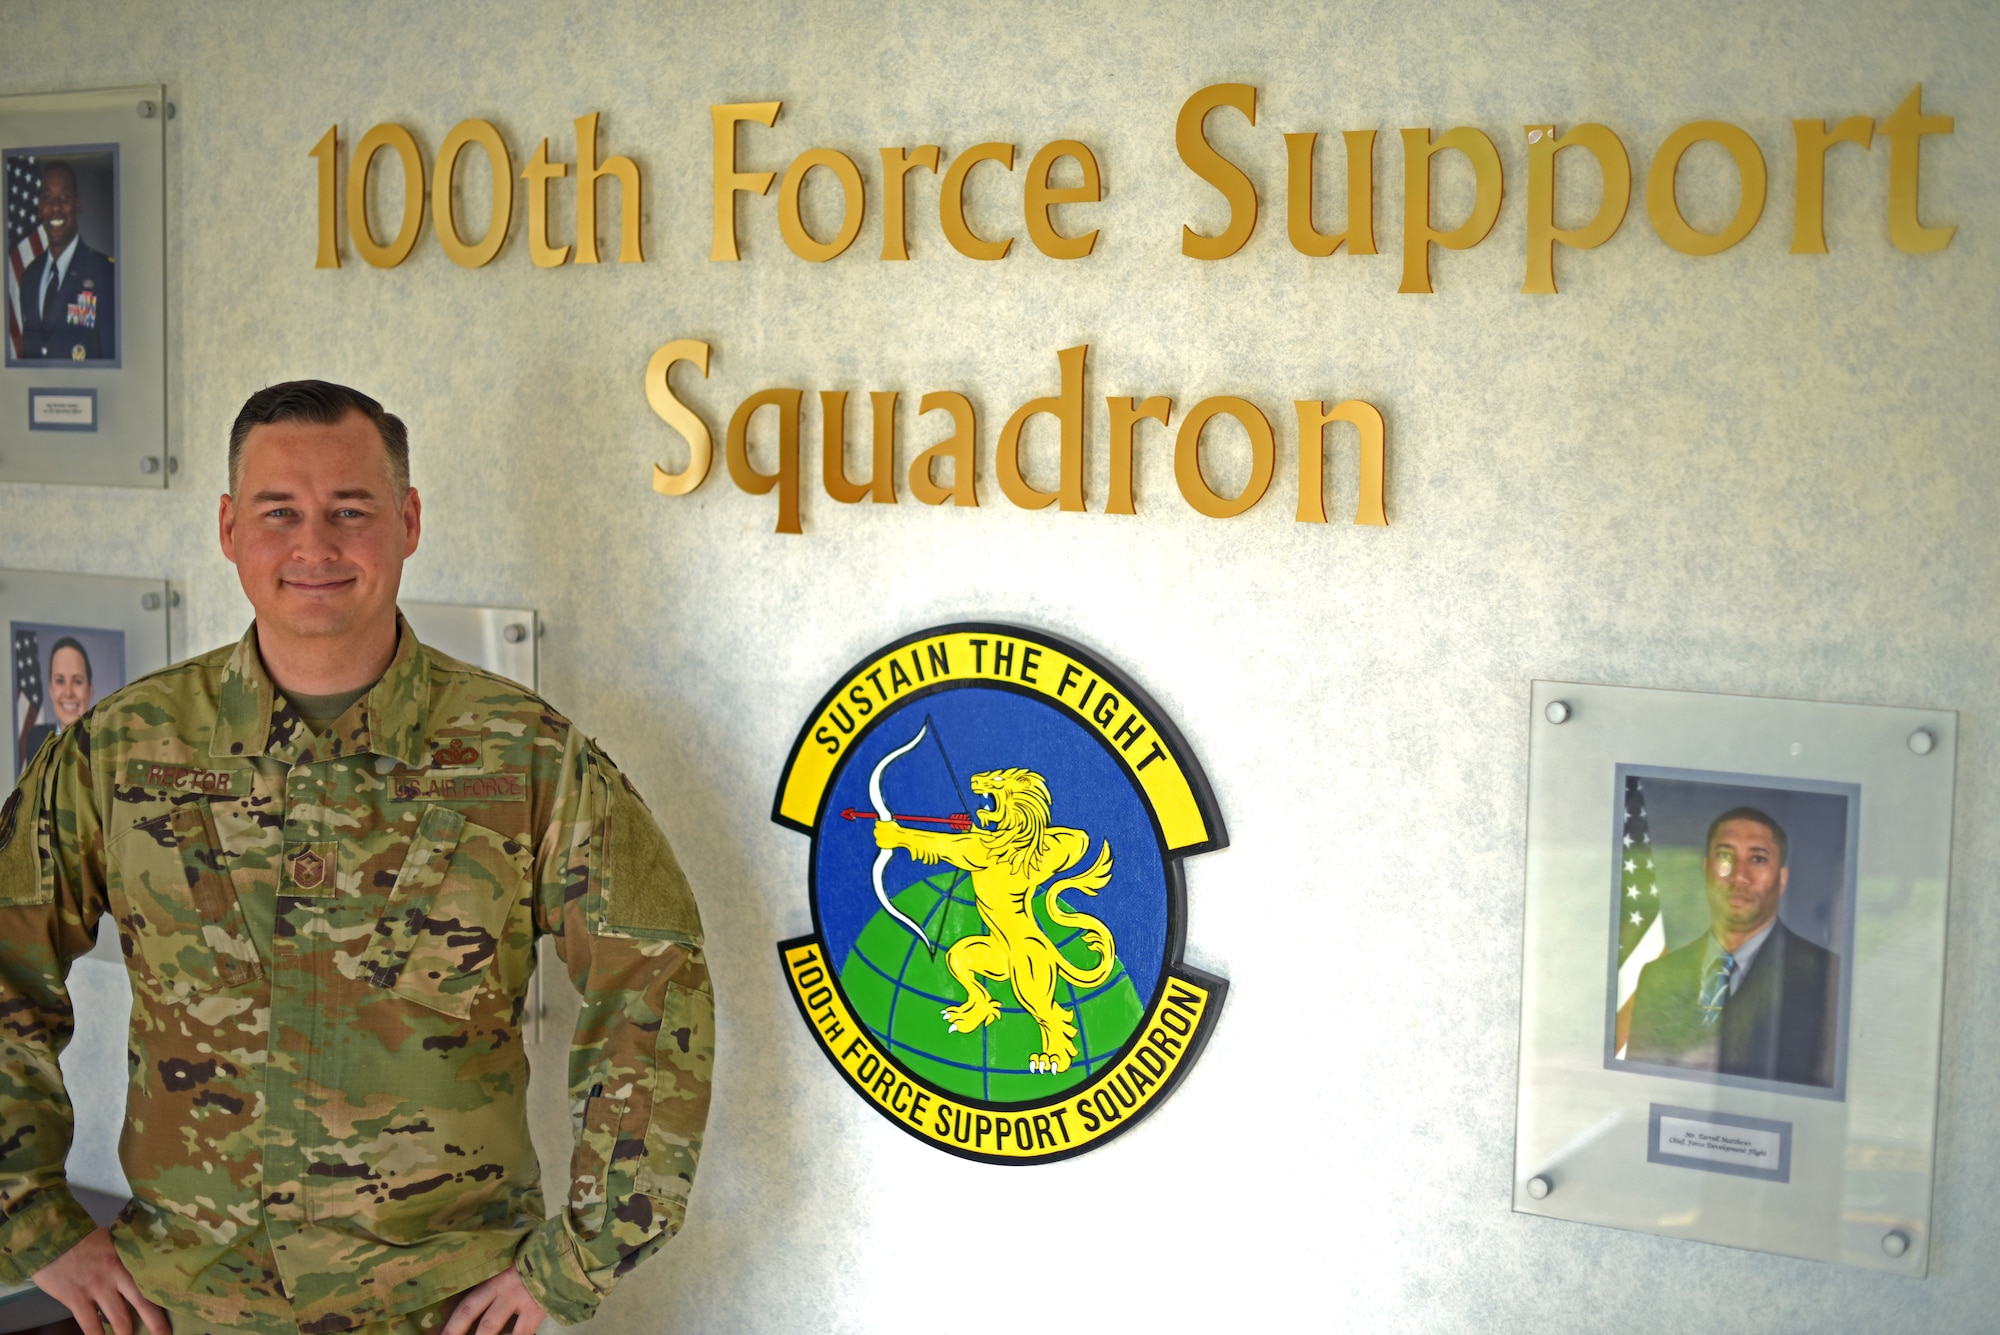 U.S. Air Force Master Sgt. Jeremy Rector, 100th Force Support Squadron first sergeant, poses for a photo at RAF Mildenhall, England, March 5, 2019. Rector recently joined Team Mildenhall after completing duties at Osan Air Base, South Korea as the 51st Operations Group first sergeant. (U.S. Air Force photo by Airman 1st Class Brandon Esau)